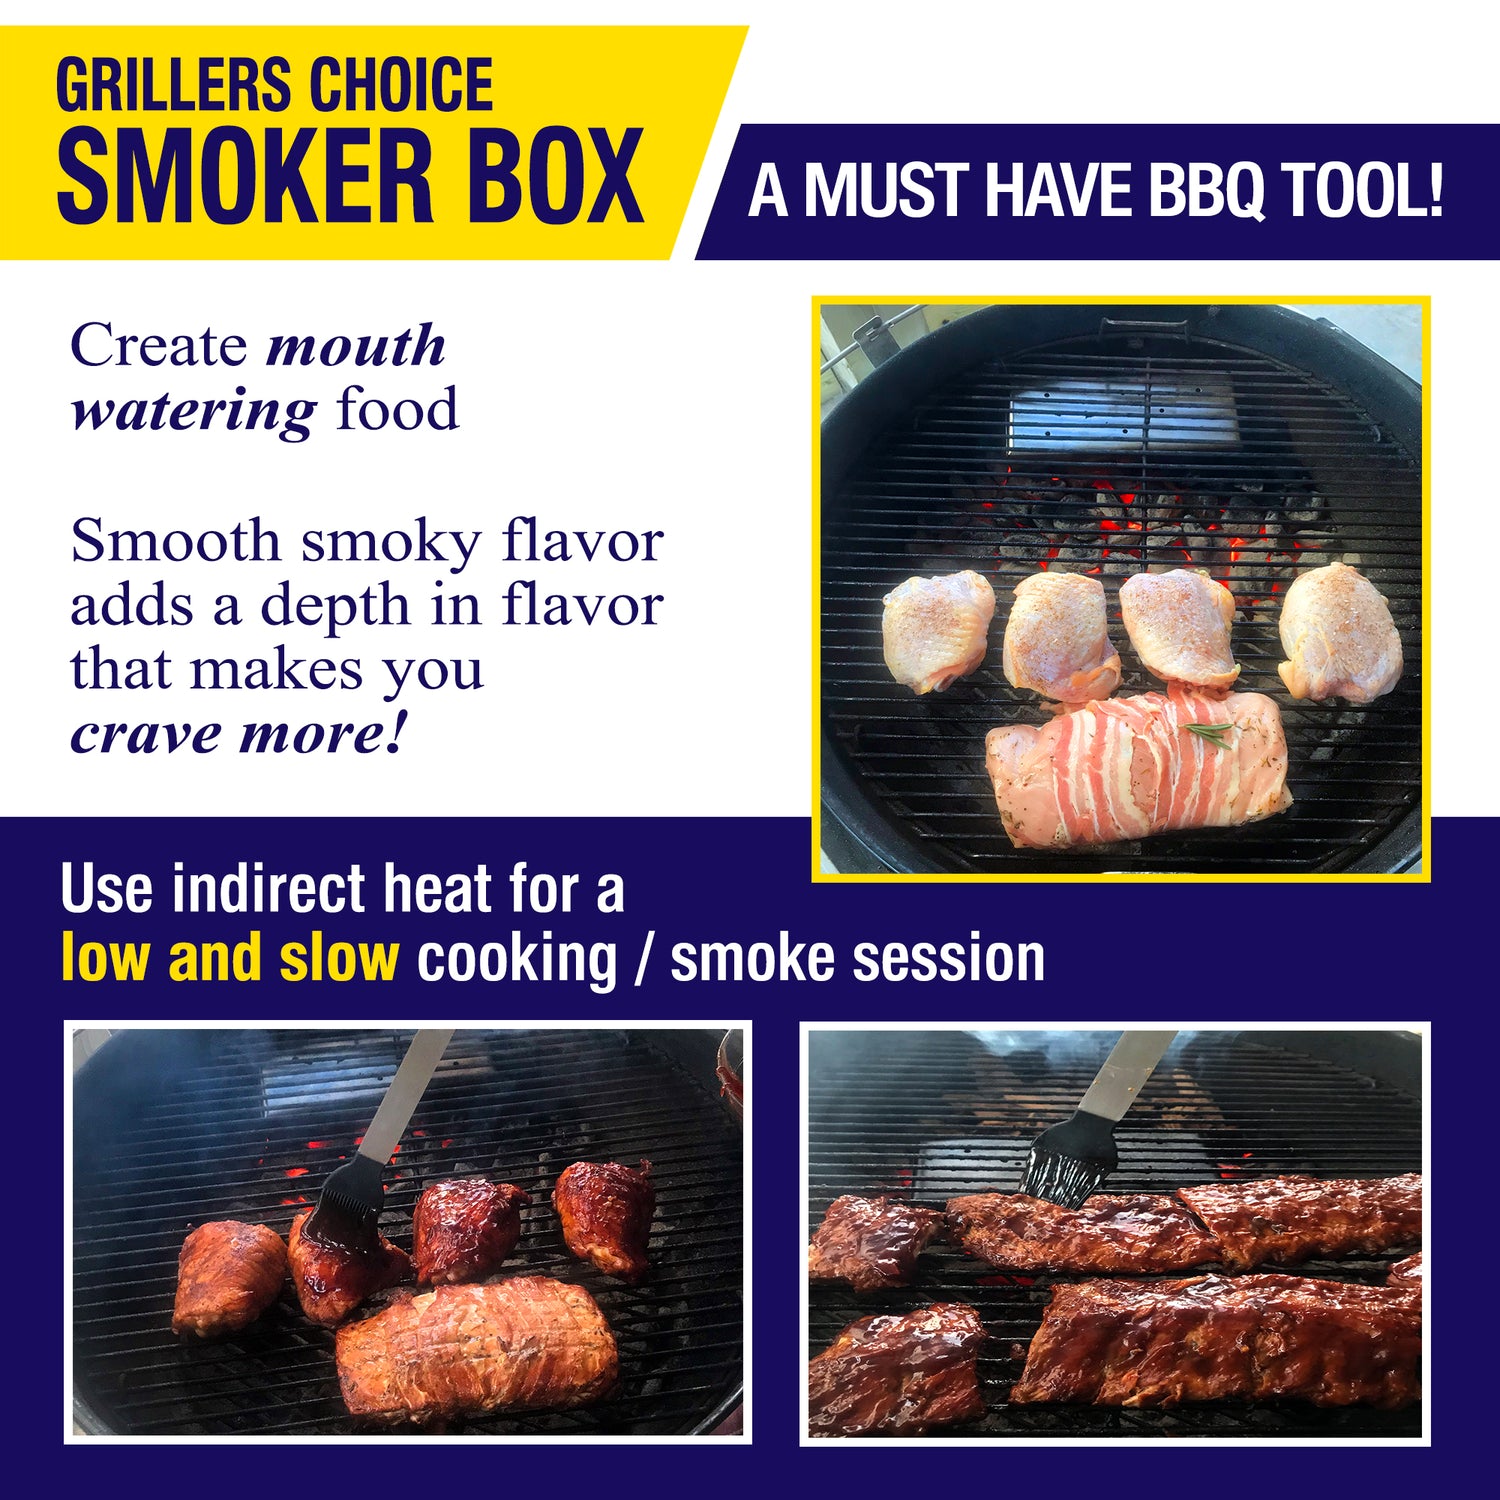 Smoker Wood Chip Box For BBQ Grill. Add Wood Chips To Tray For The